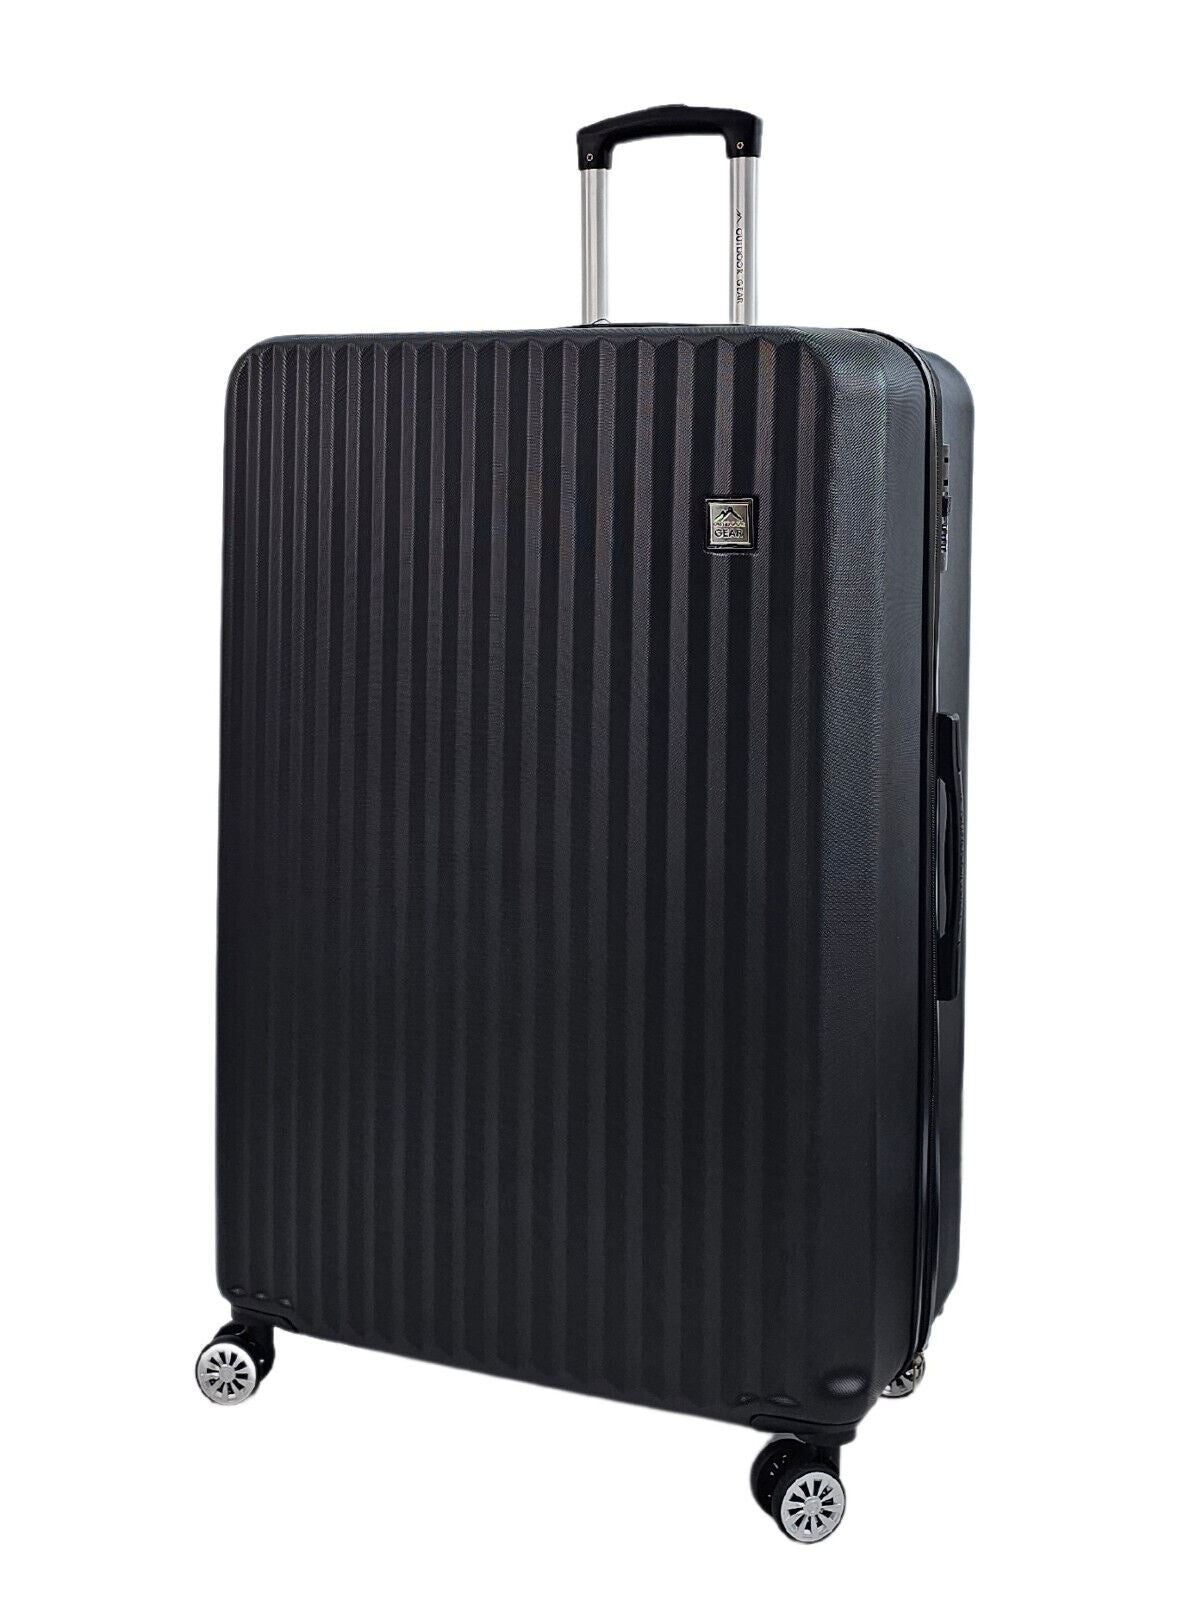 Albertville Extra Large Hard Shell Suitcase in Black